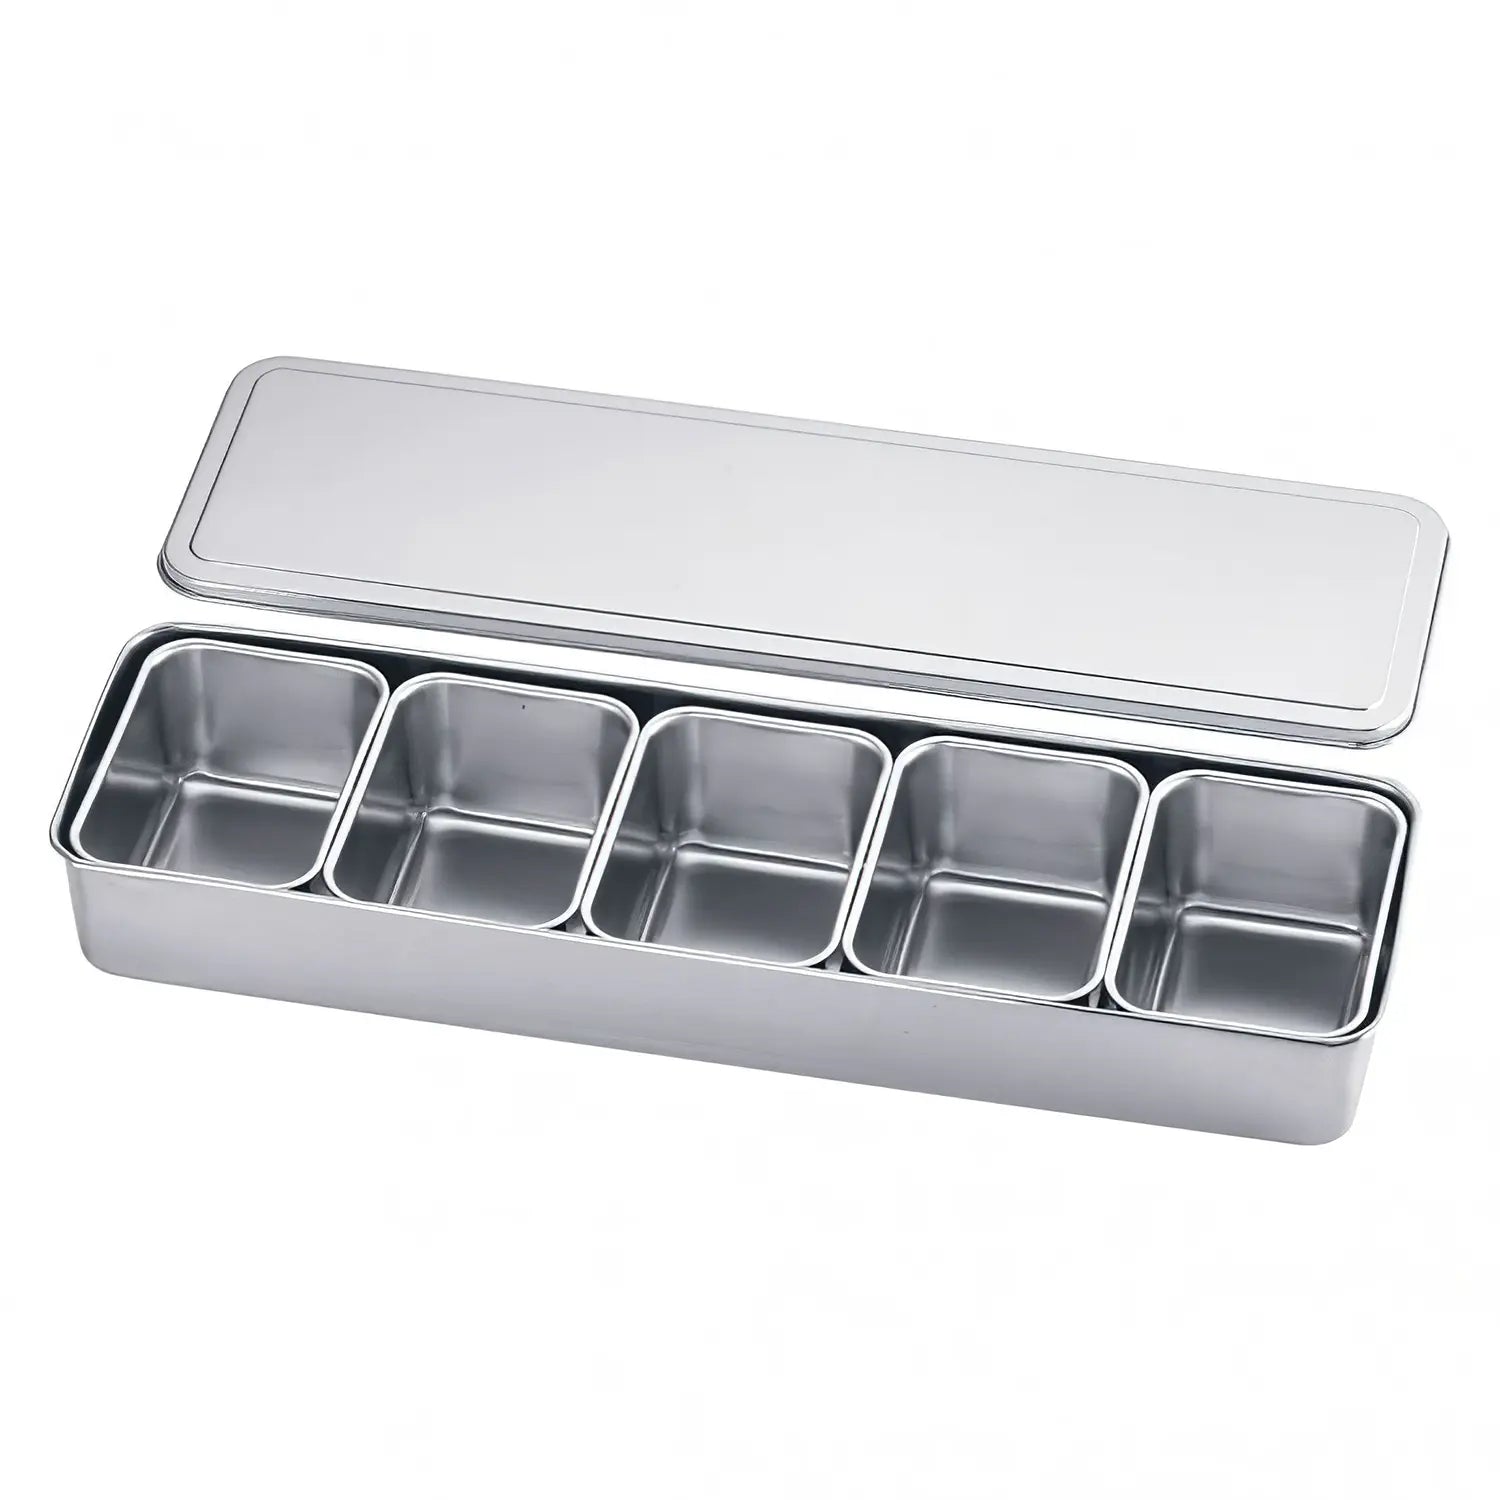 Compact 5-Compartment Stainless Steel Yakumi Seasoning Container by Clover